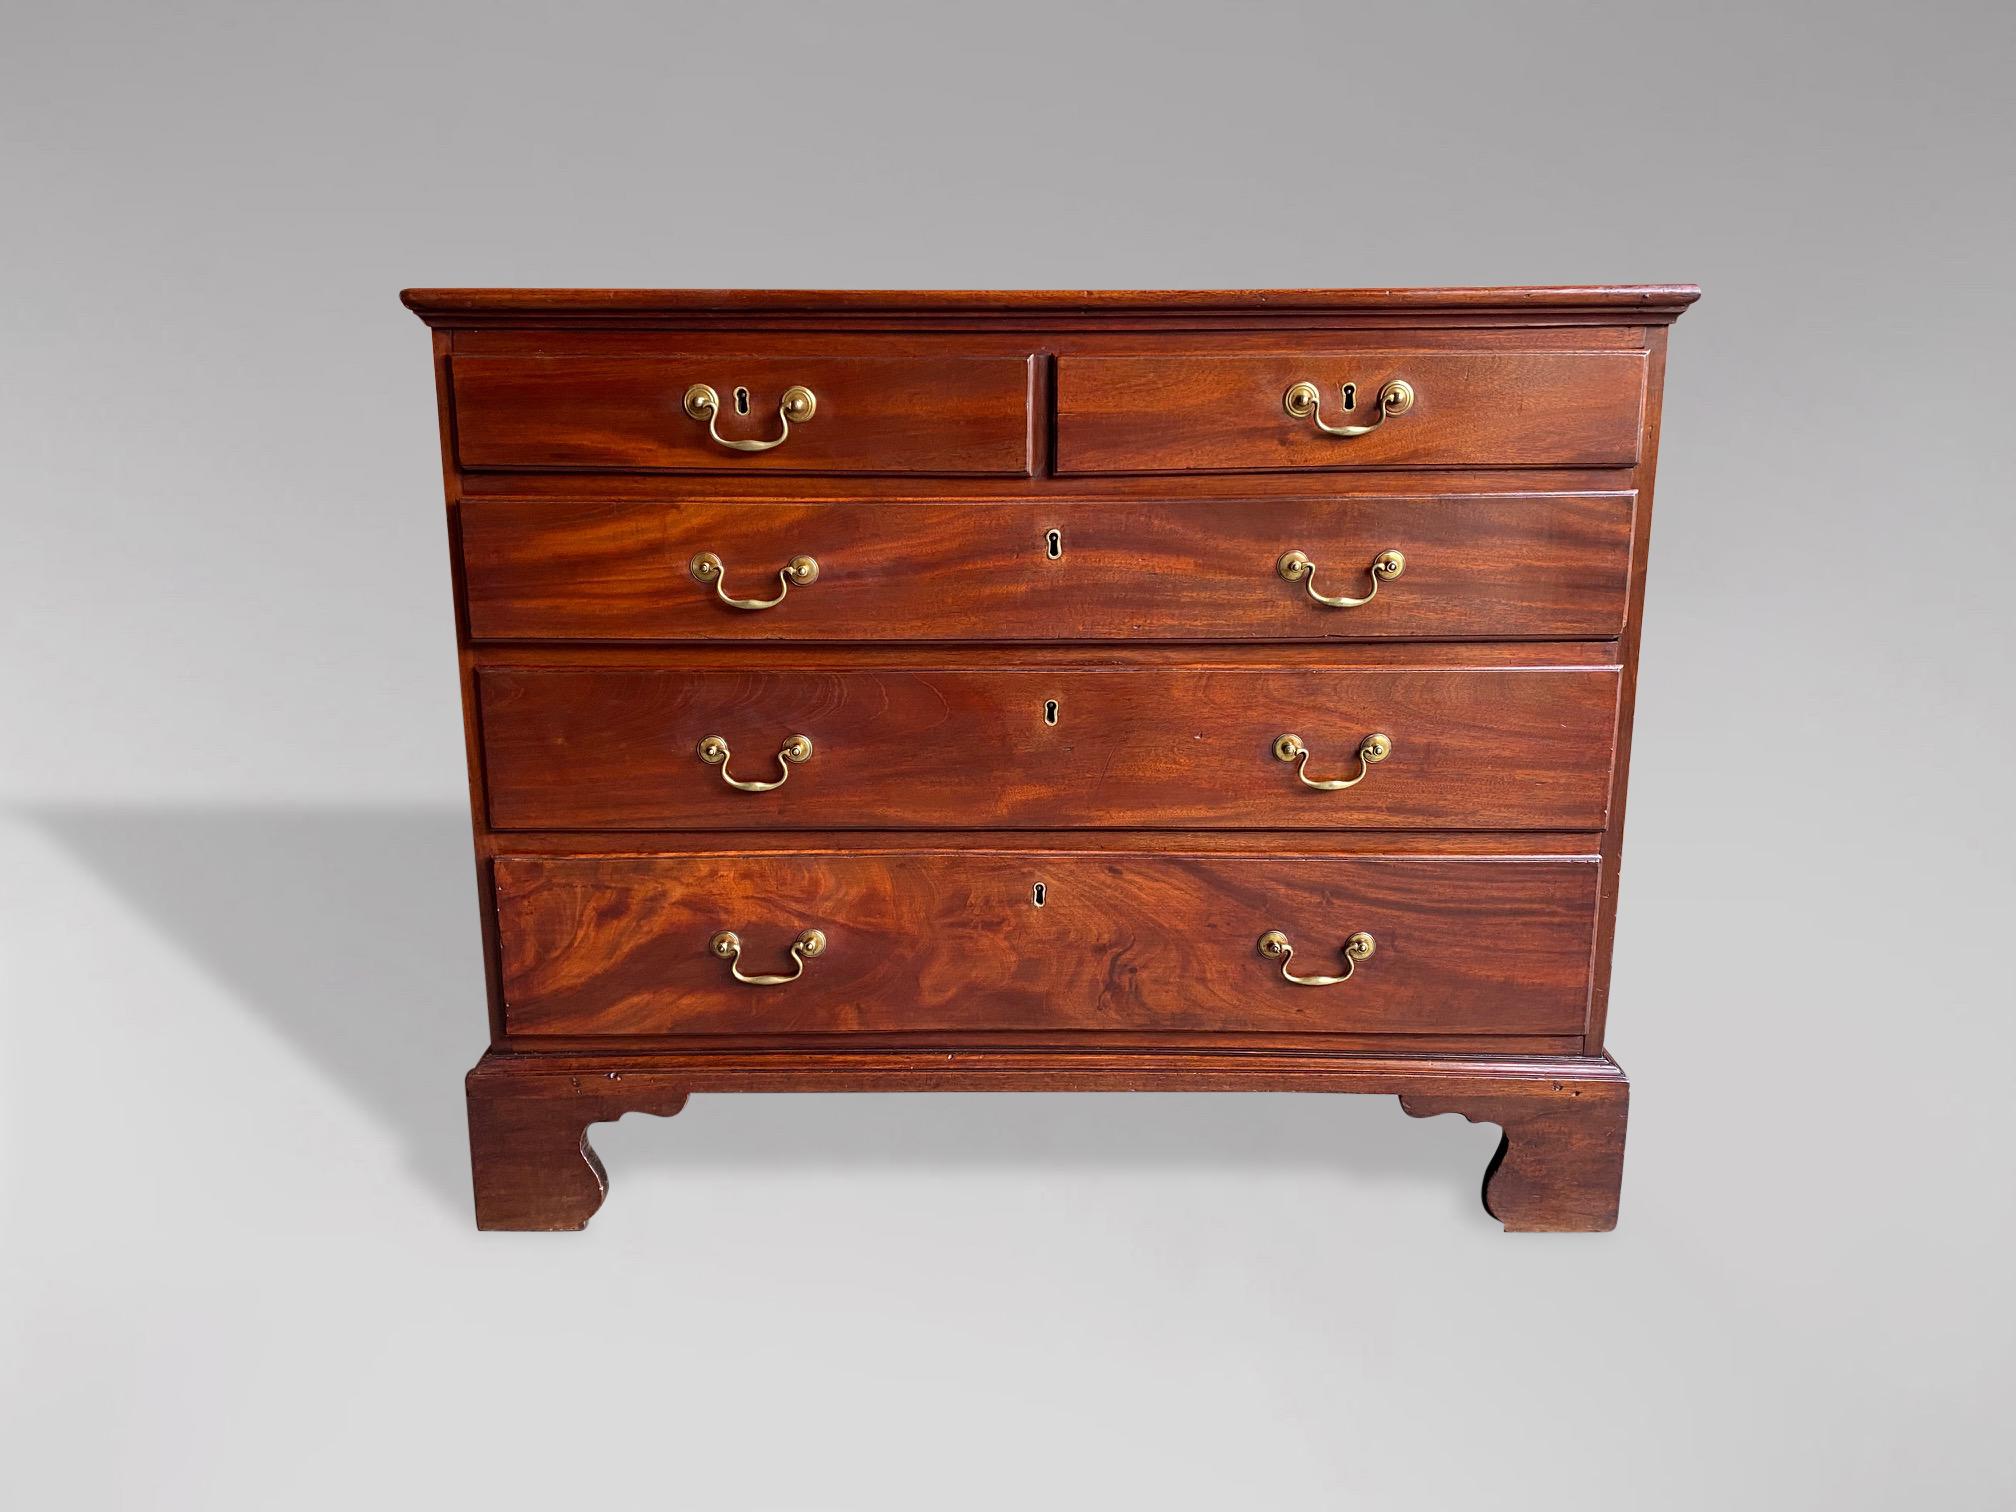 A late 18th century, George III period mahogany chest of drawers. Rectangular top, moulded edge above two small and three long graduated drawers with brass swan neck handles, standing on shaped bracket feet. One key with working locks. Rich warm